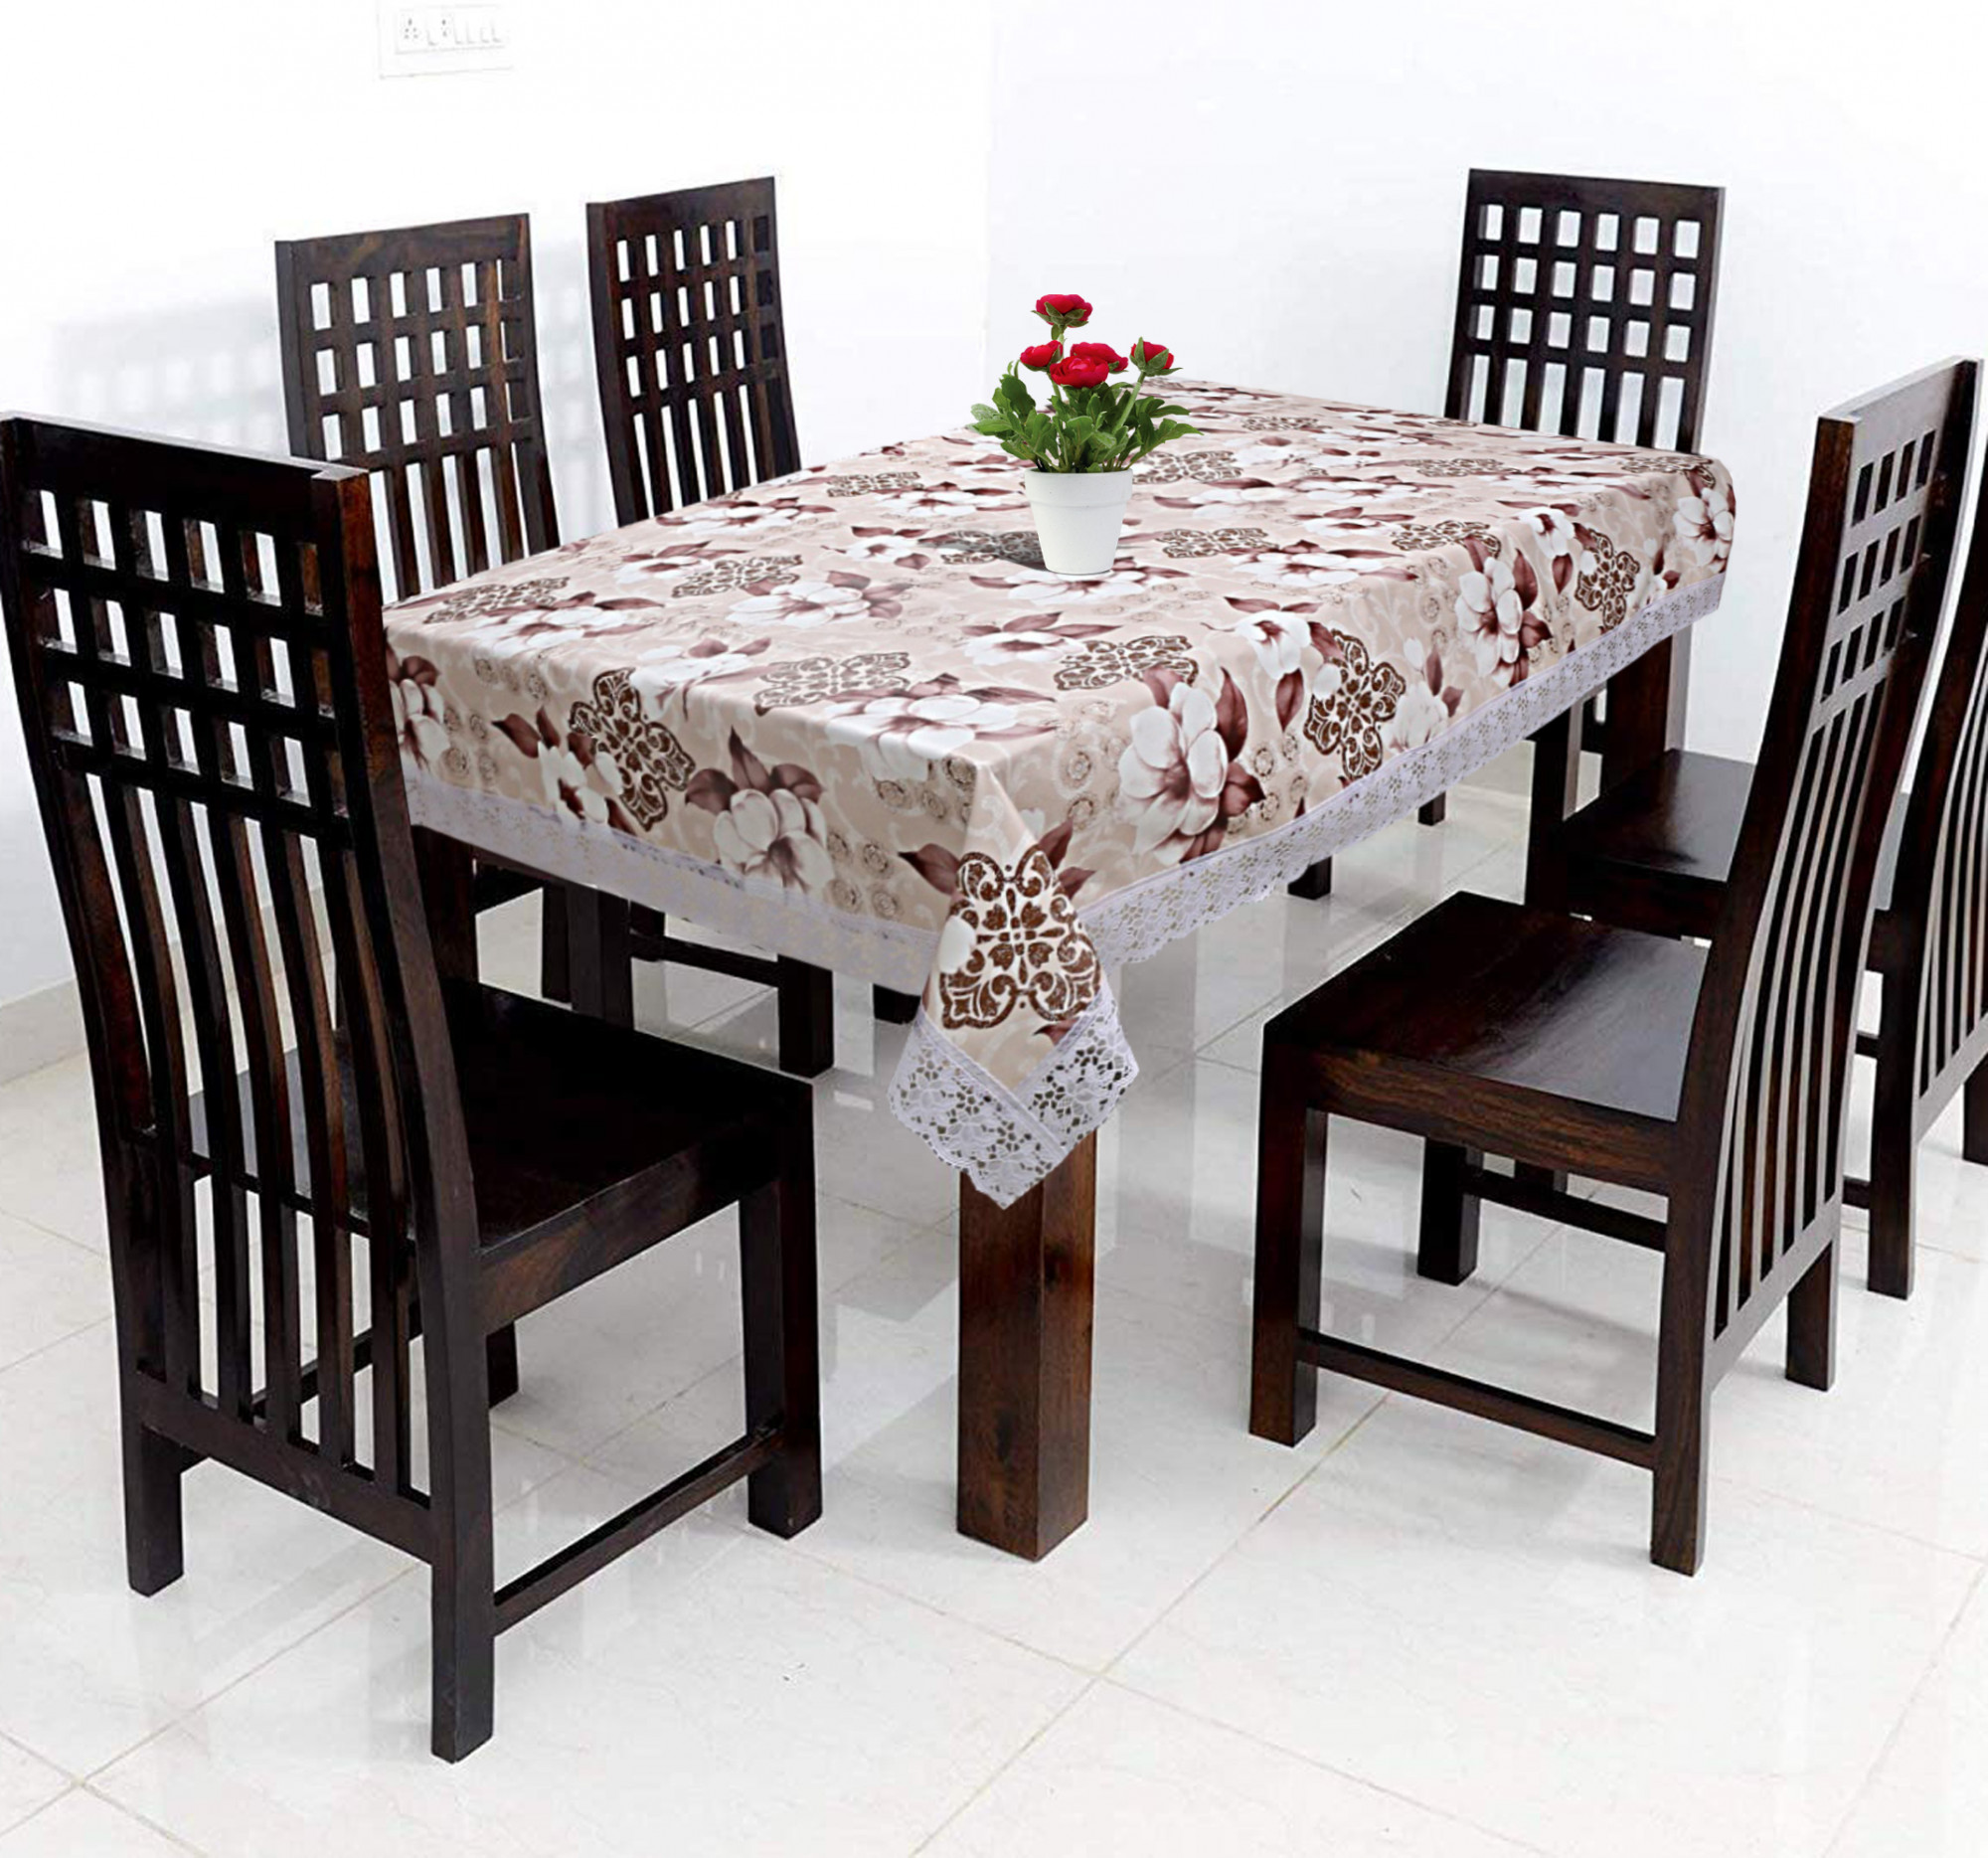 Kuber Industries Flower Design PVC 6 Seater Dining Table Cover 60